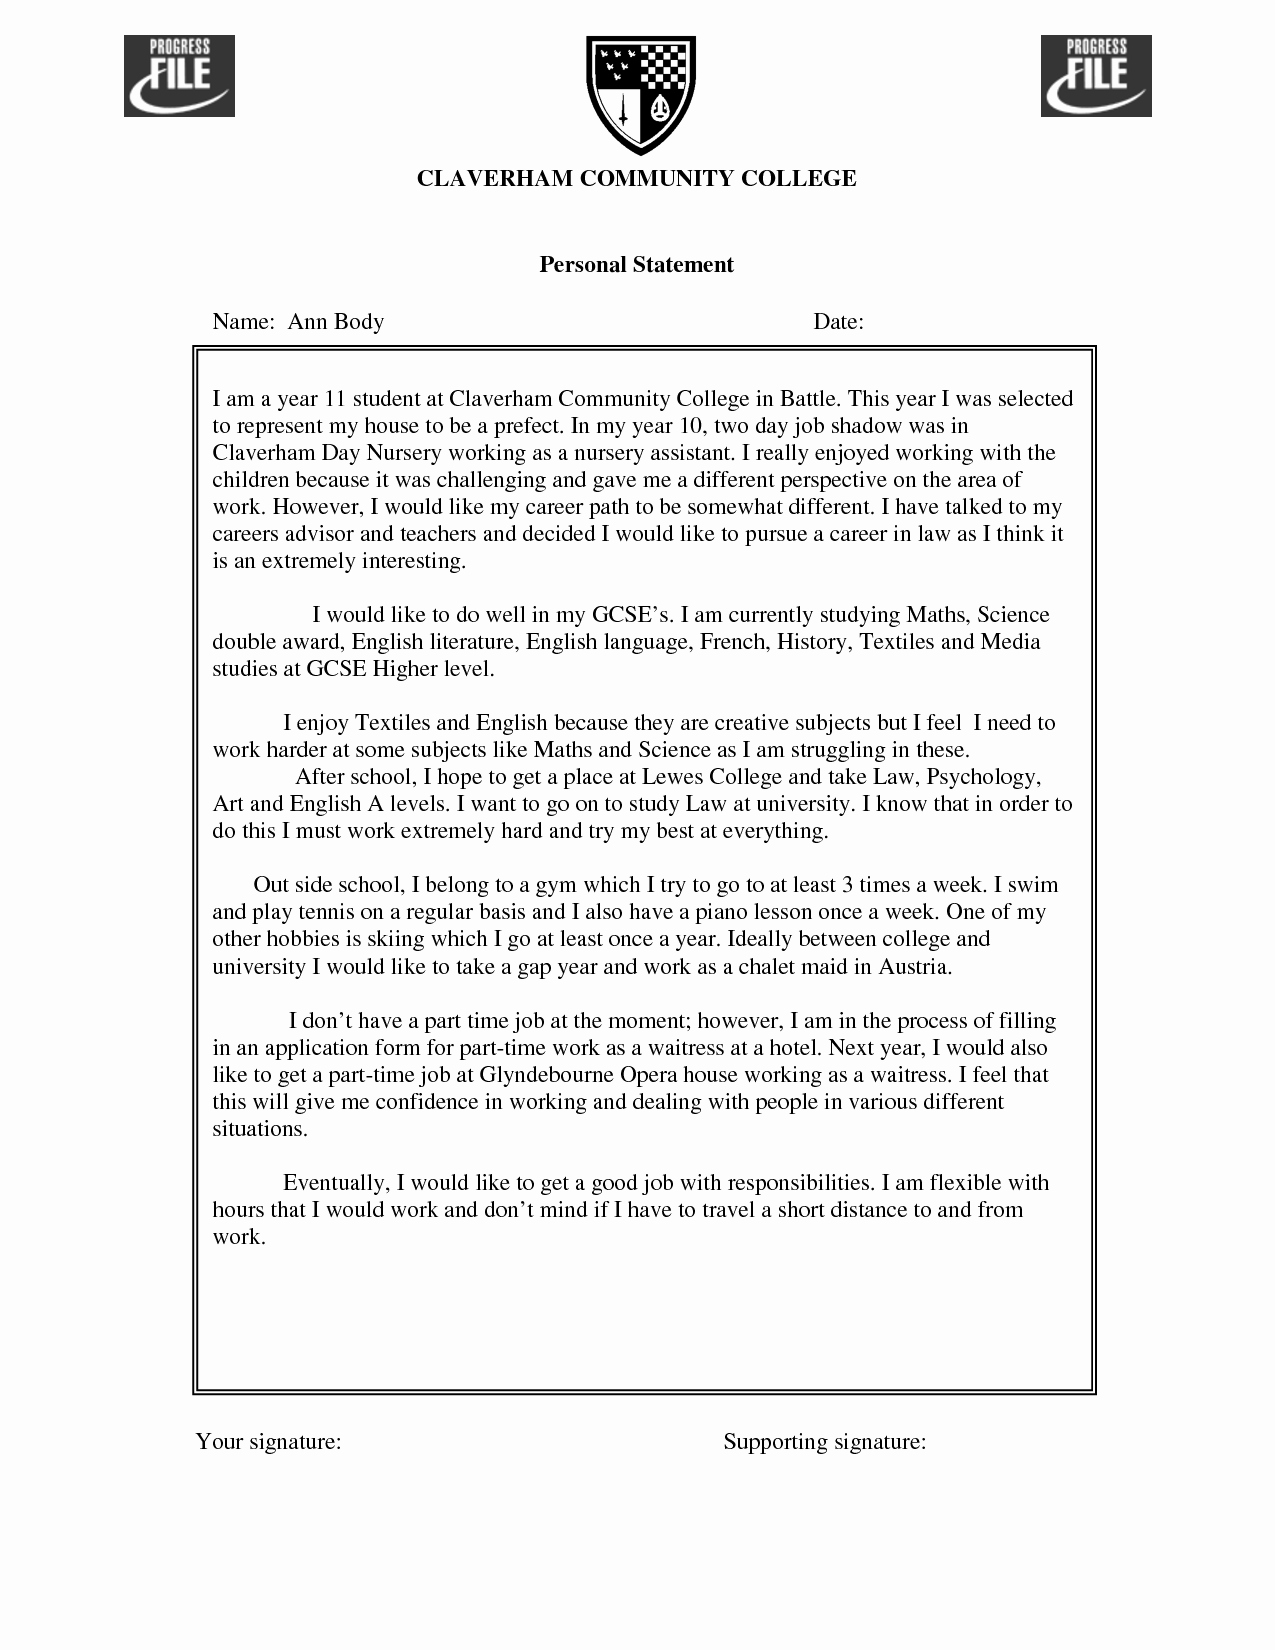 Law School Outline Template Luxury Purchasing A Custom Essay 4 Golden Rules to Follow Write